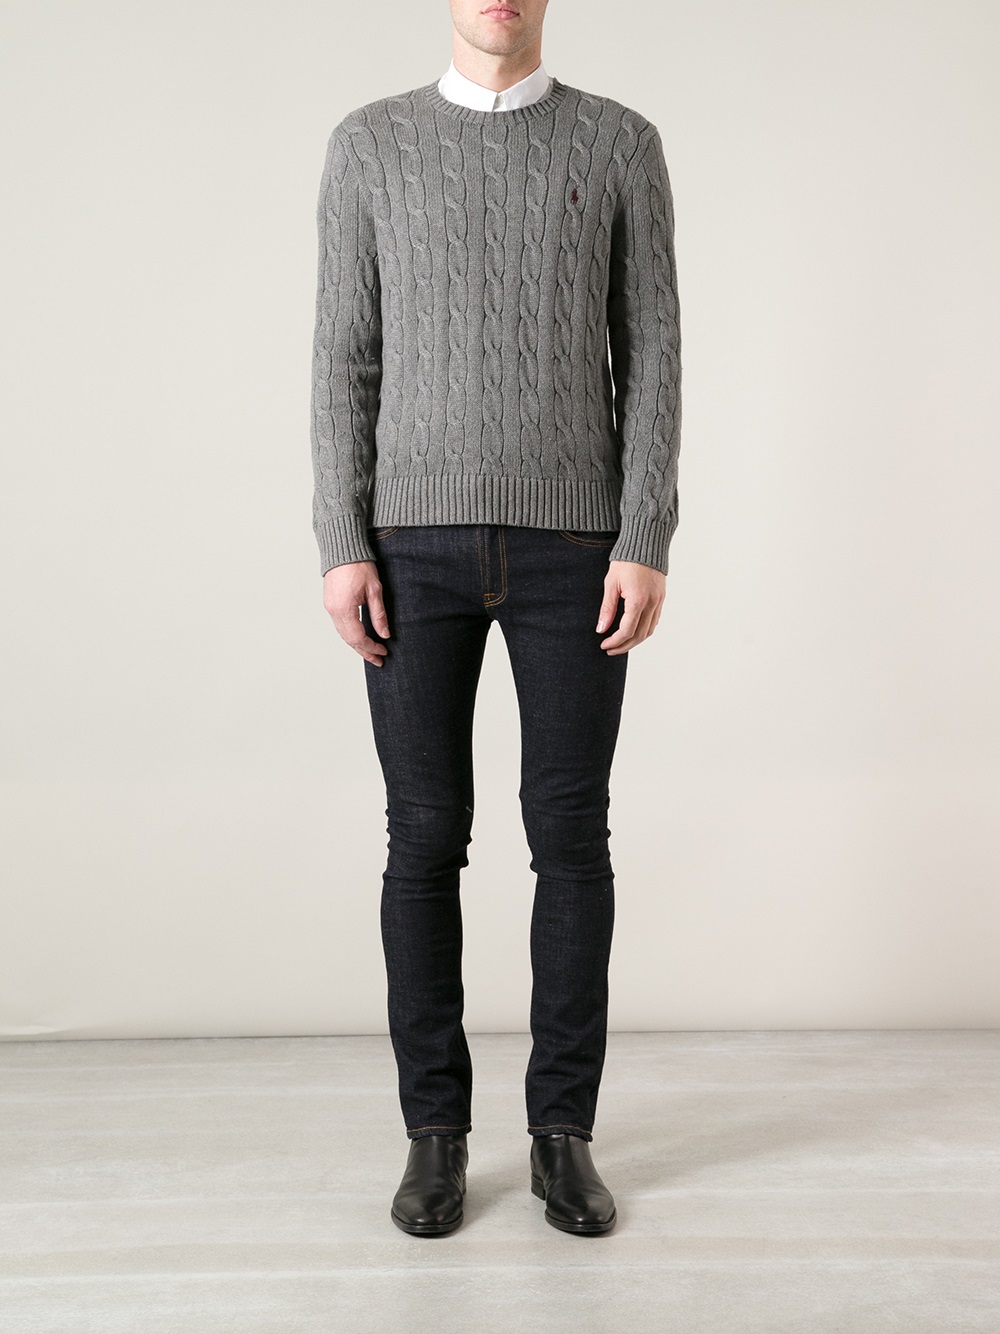 Polo Ralph Lauren Cable Knit Sweater in Gray for Men | Lyst